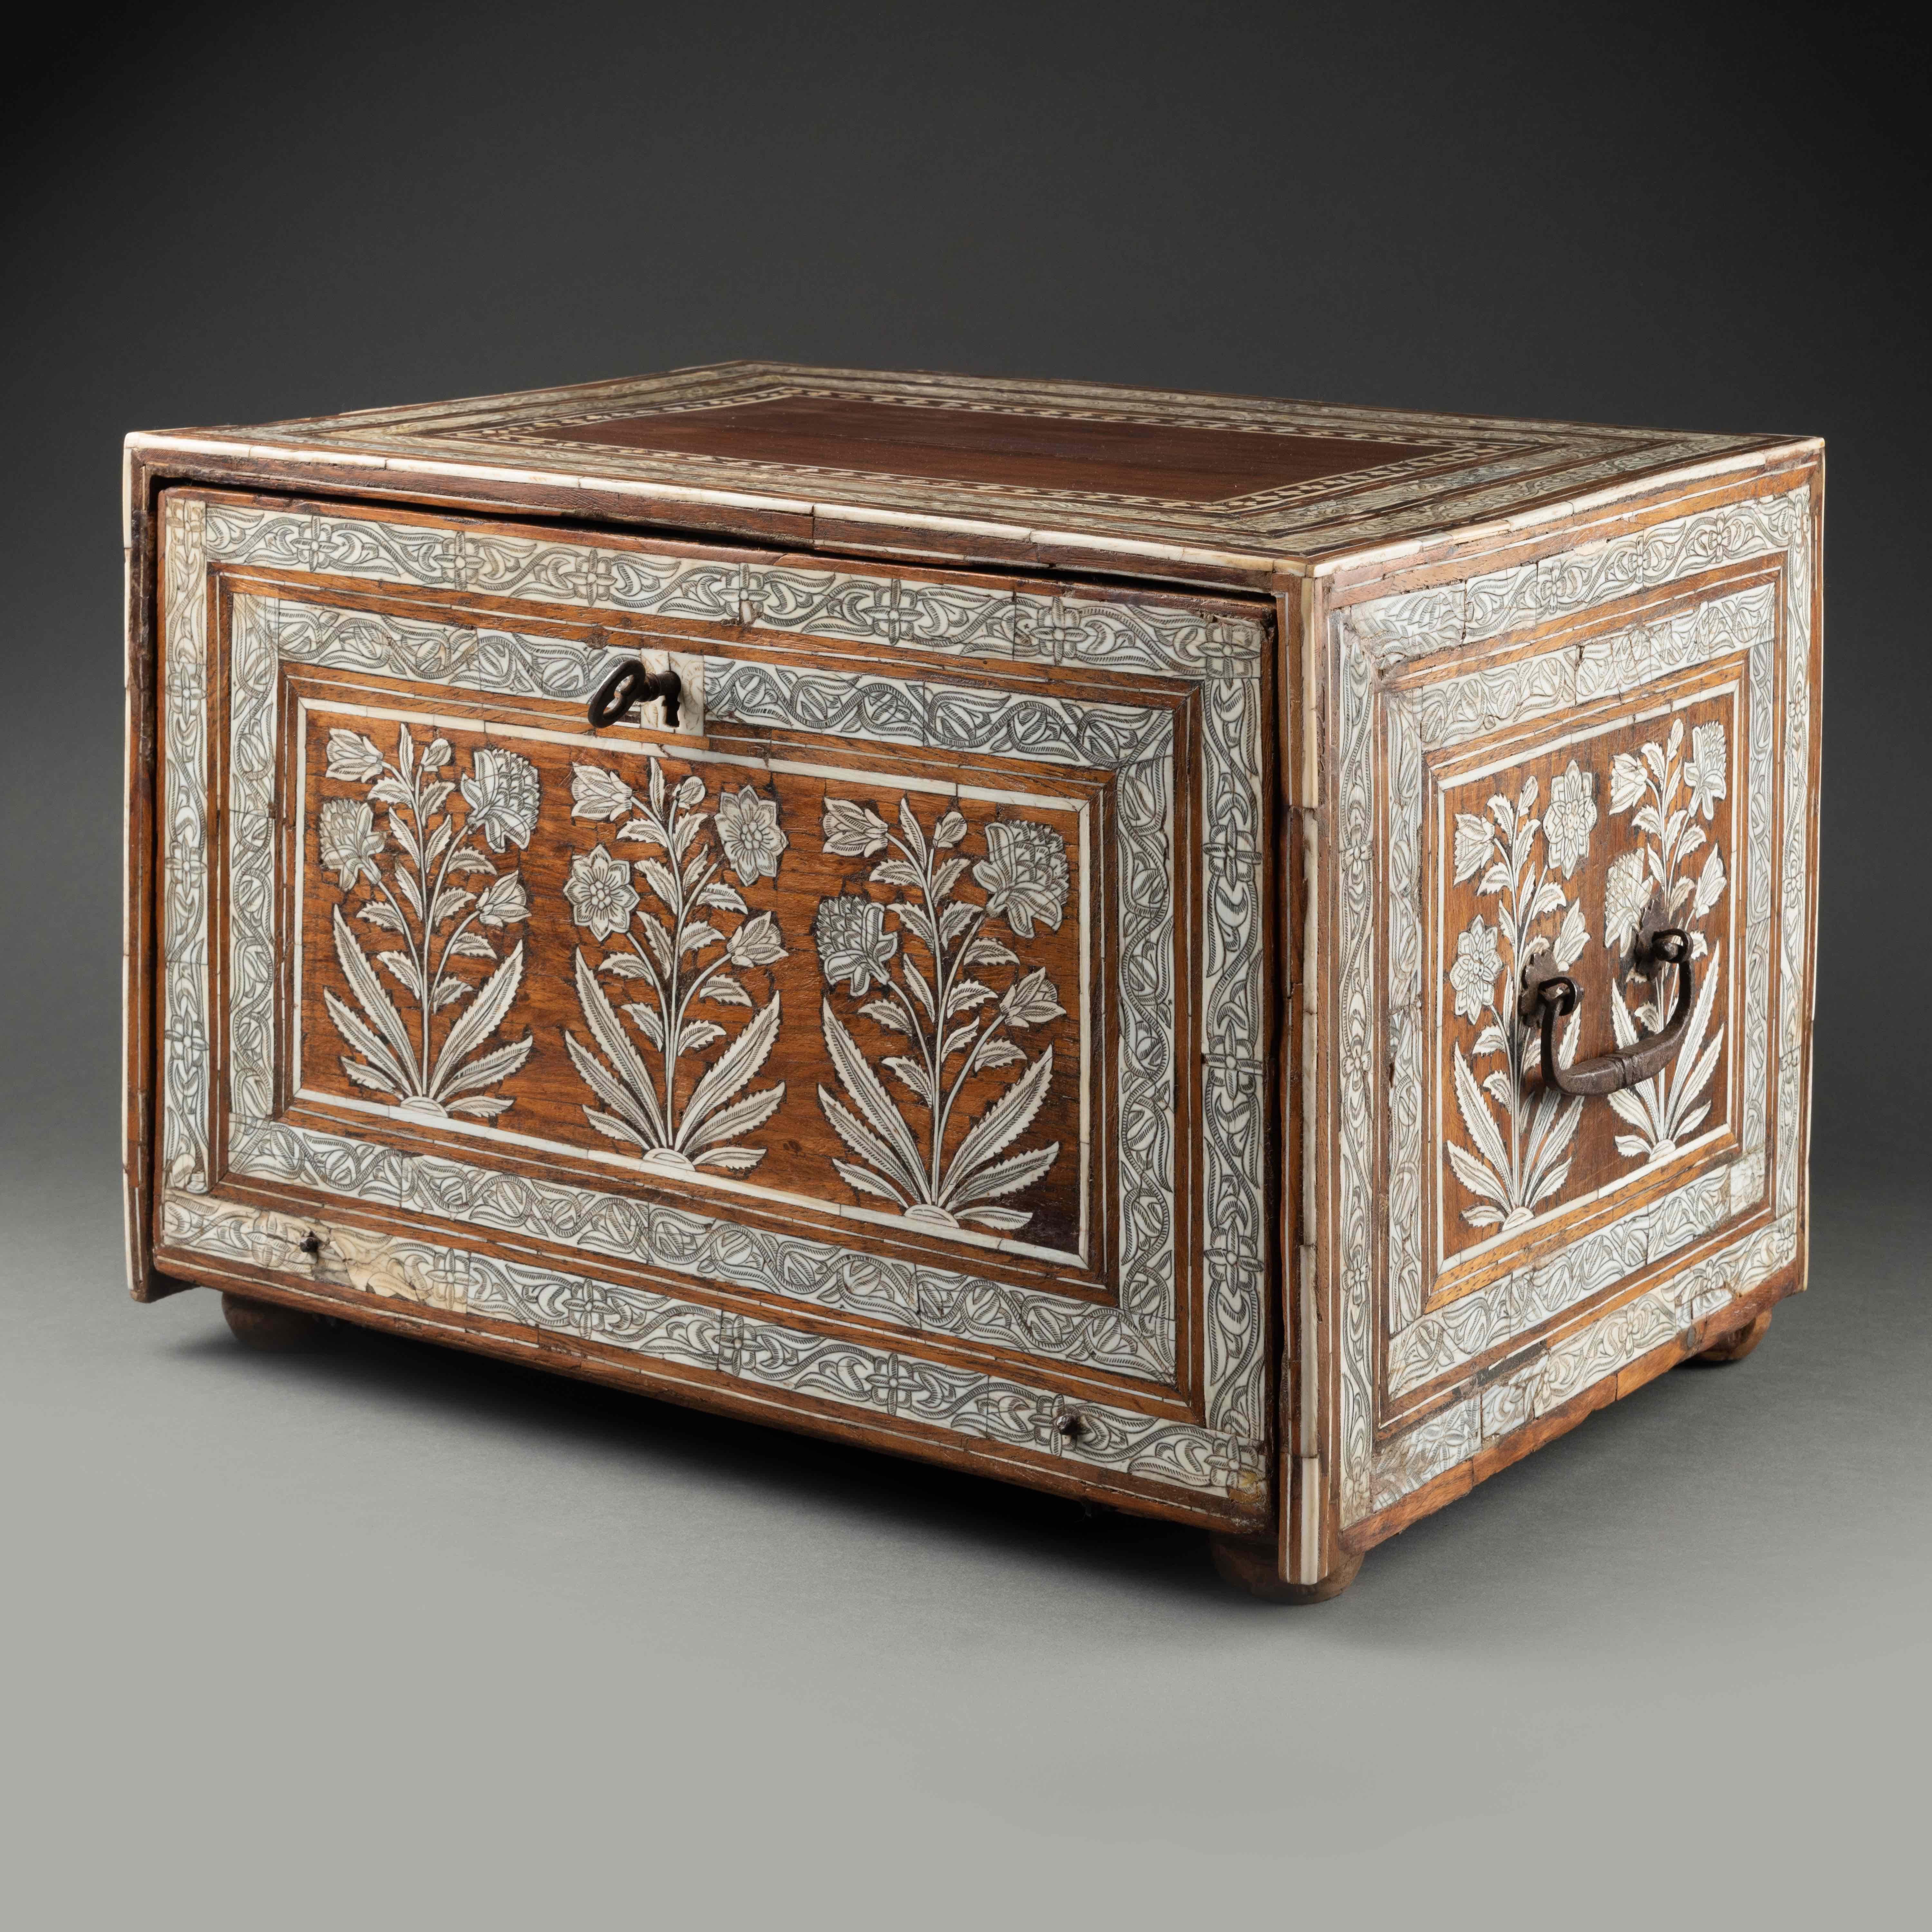 Anglo-Indian Mughal Ivory Inlaid Wood Cabinet, 17th Century For Sale